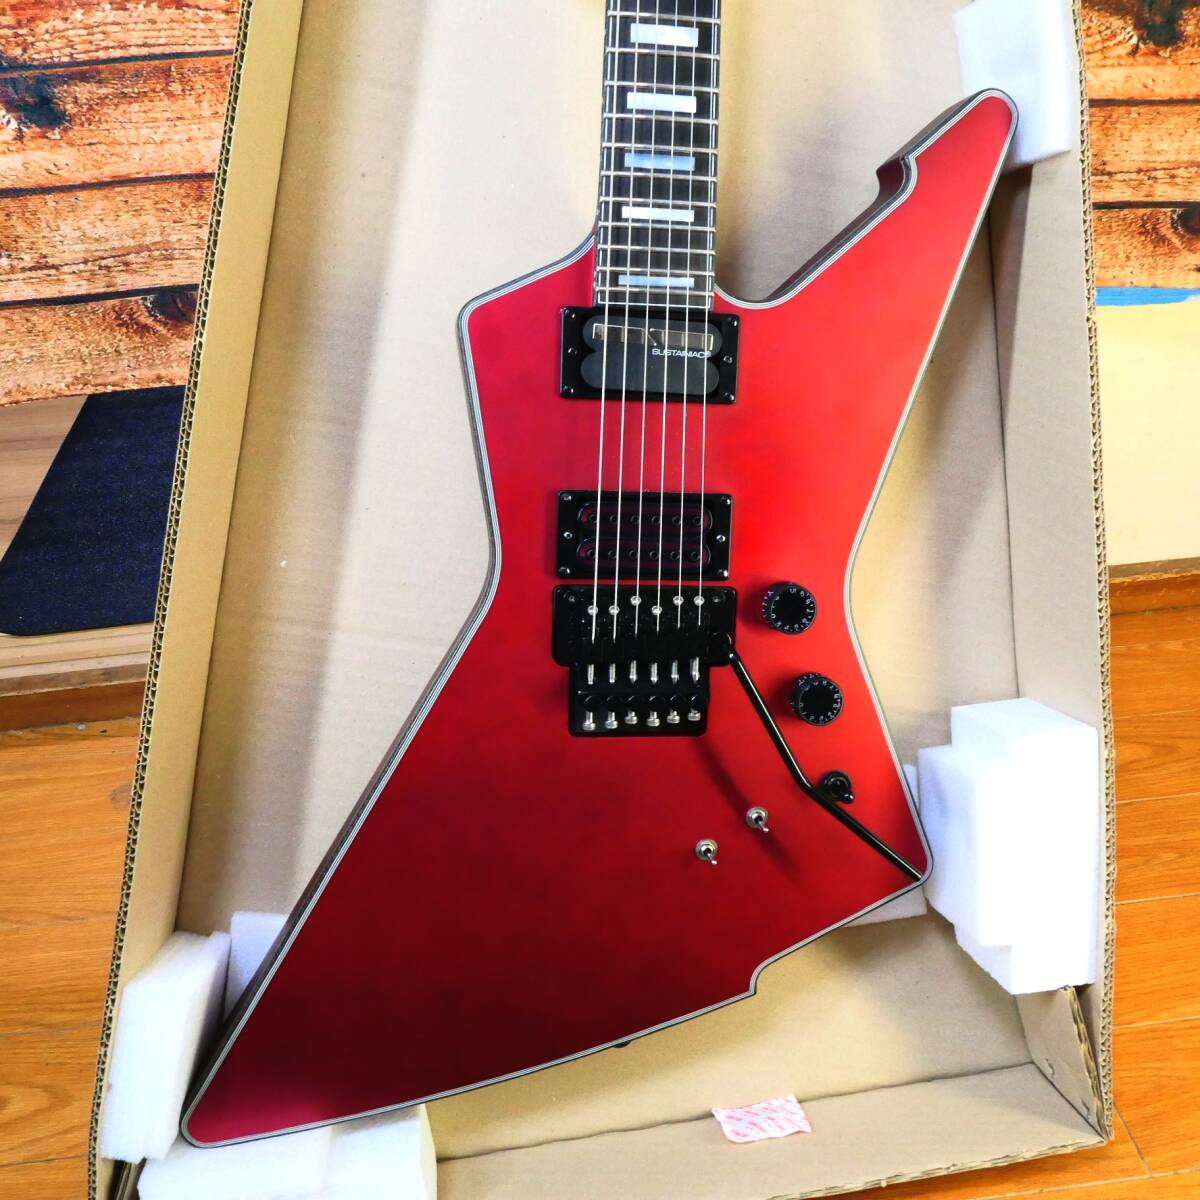 SCHECTER E-1 FR S Special Edition Candy Apple Red シェクター エクスプローラータイプ 赤 アーム付き 入手困難 長いサスティンの画像1